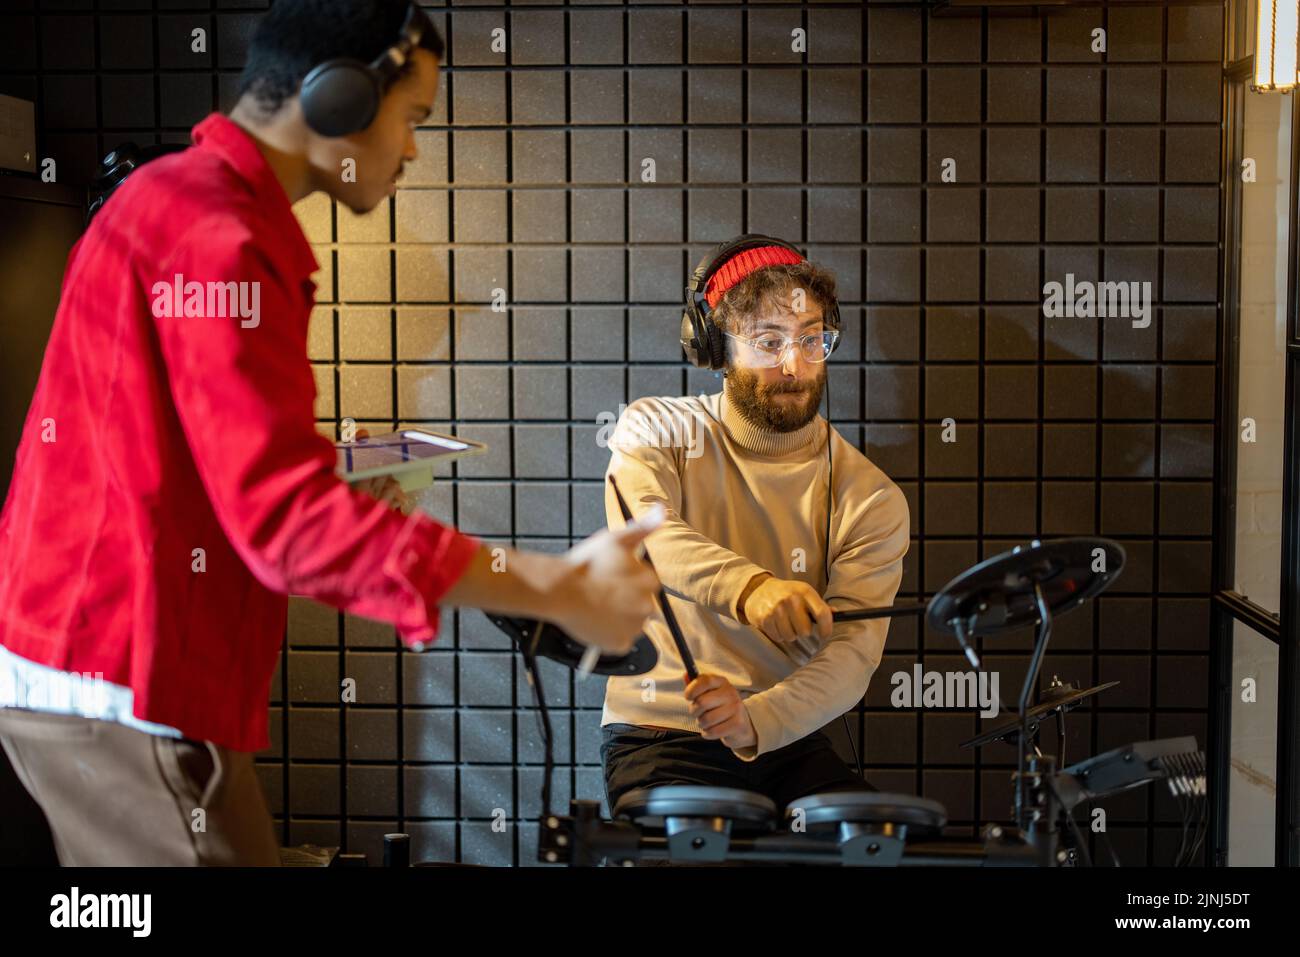 Two stylish men playing electric drums, composing electronic music at small recording studio. Small band creating or practicing music in a home studio Stock Photo